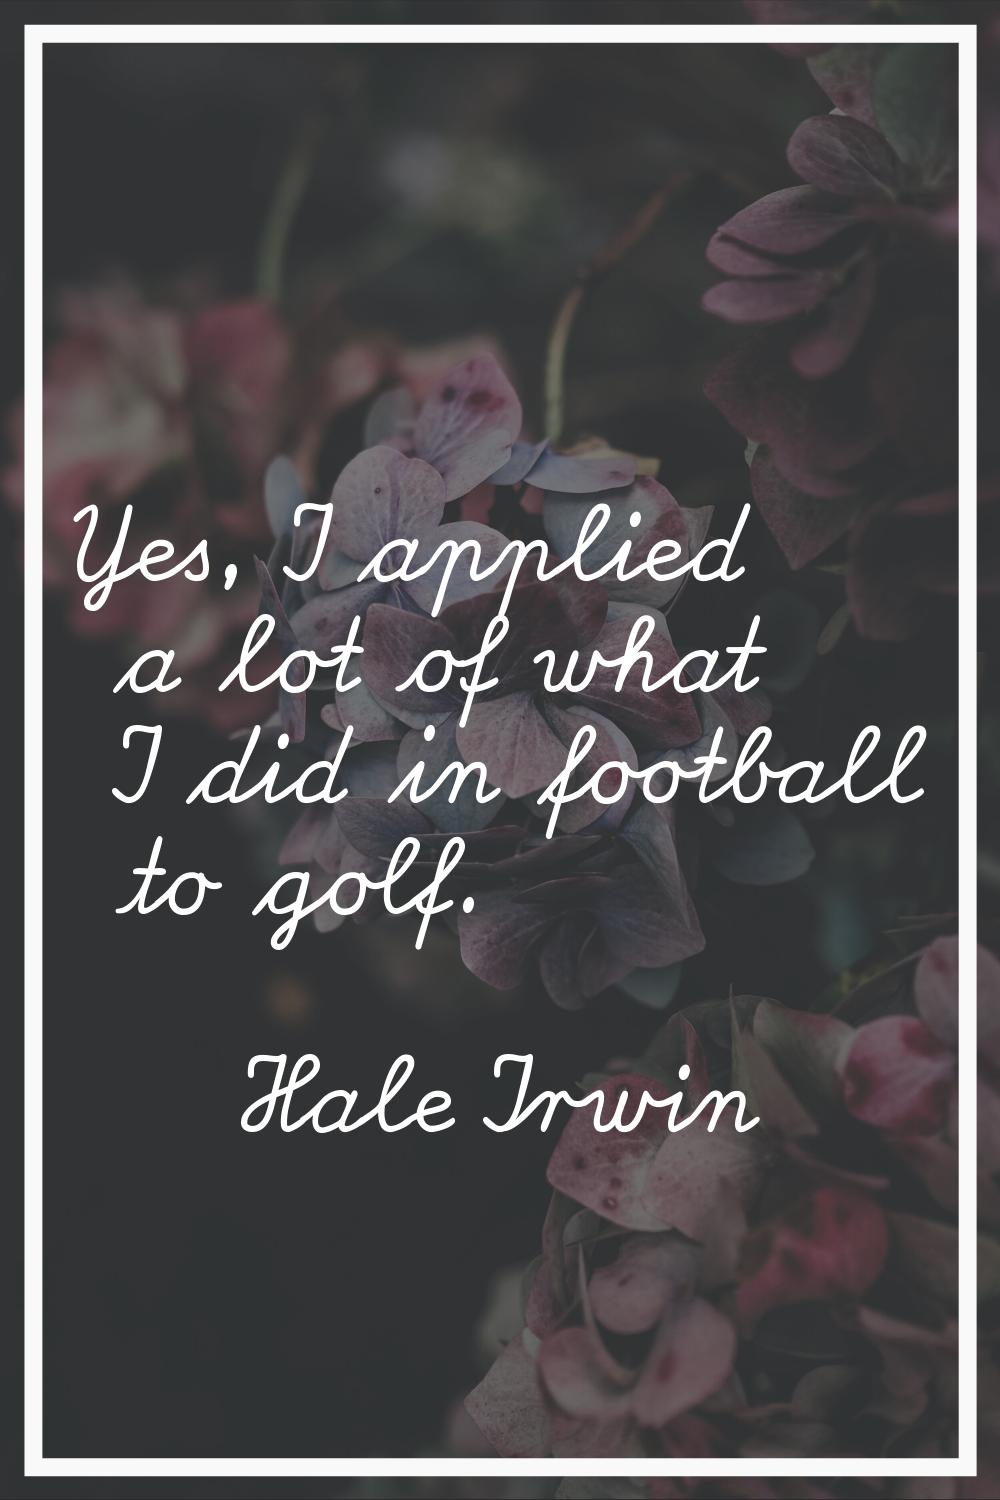 Yes, I applied a lot of what I did in football to golf.